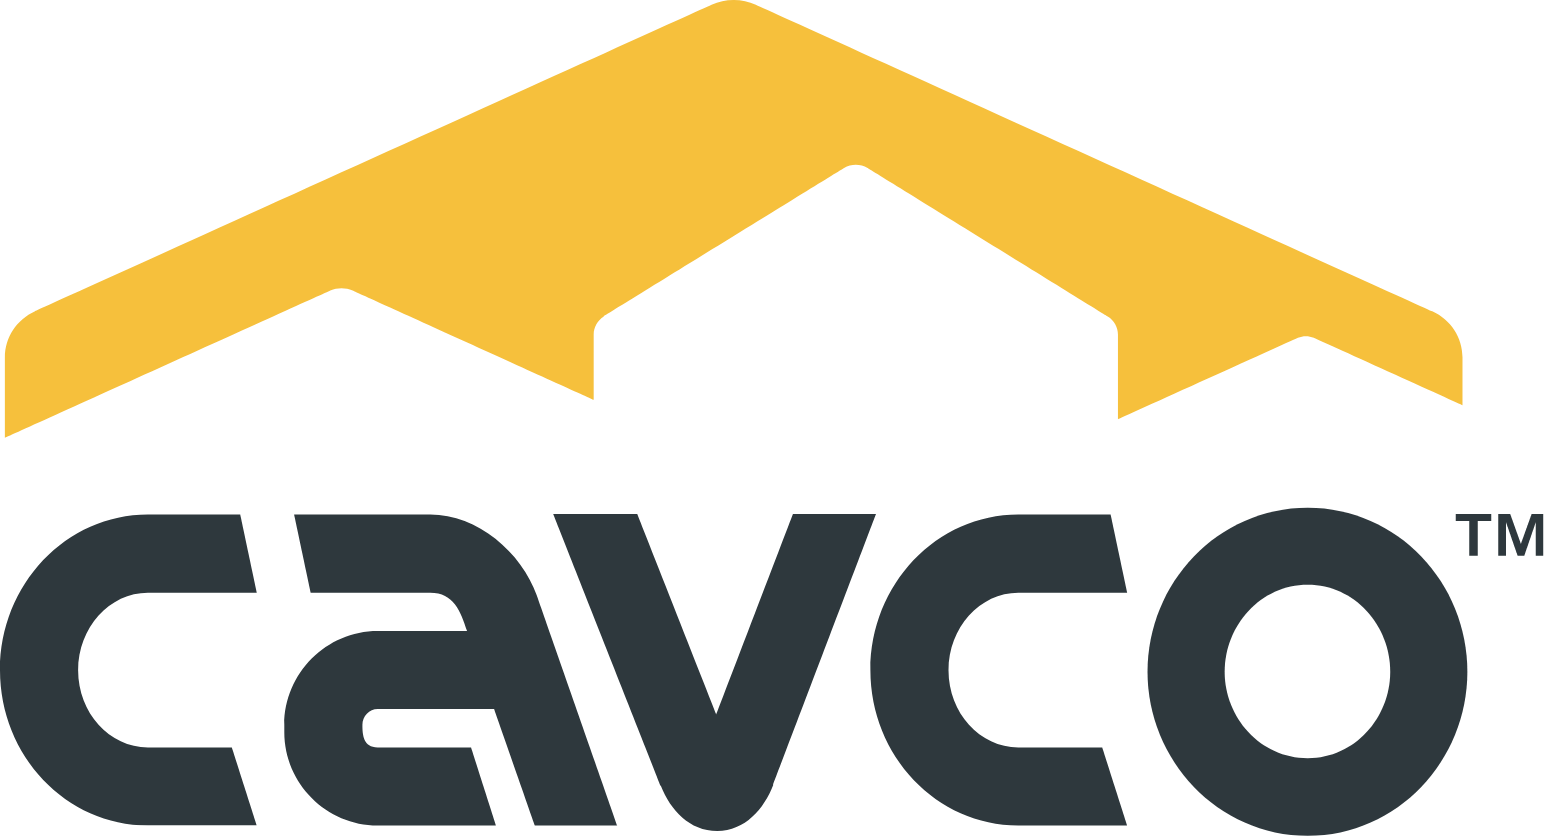 Cavco Industries logo large (transparent PNG)